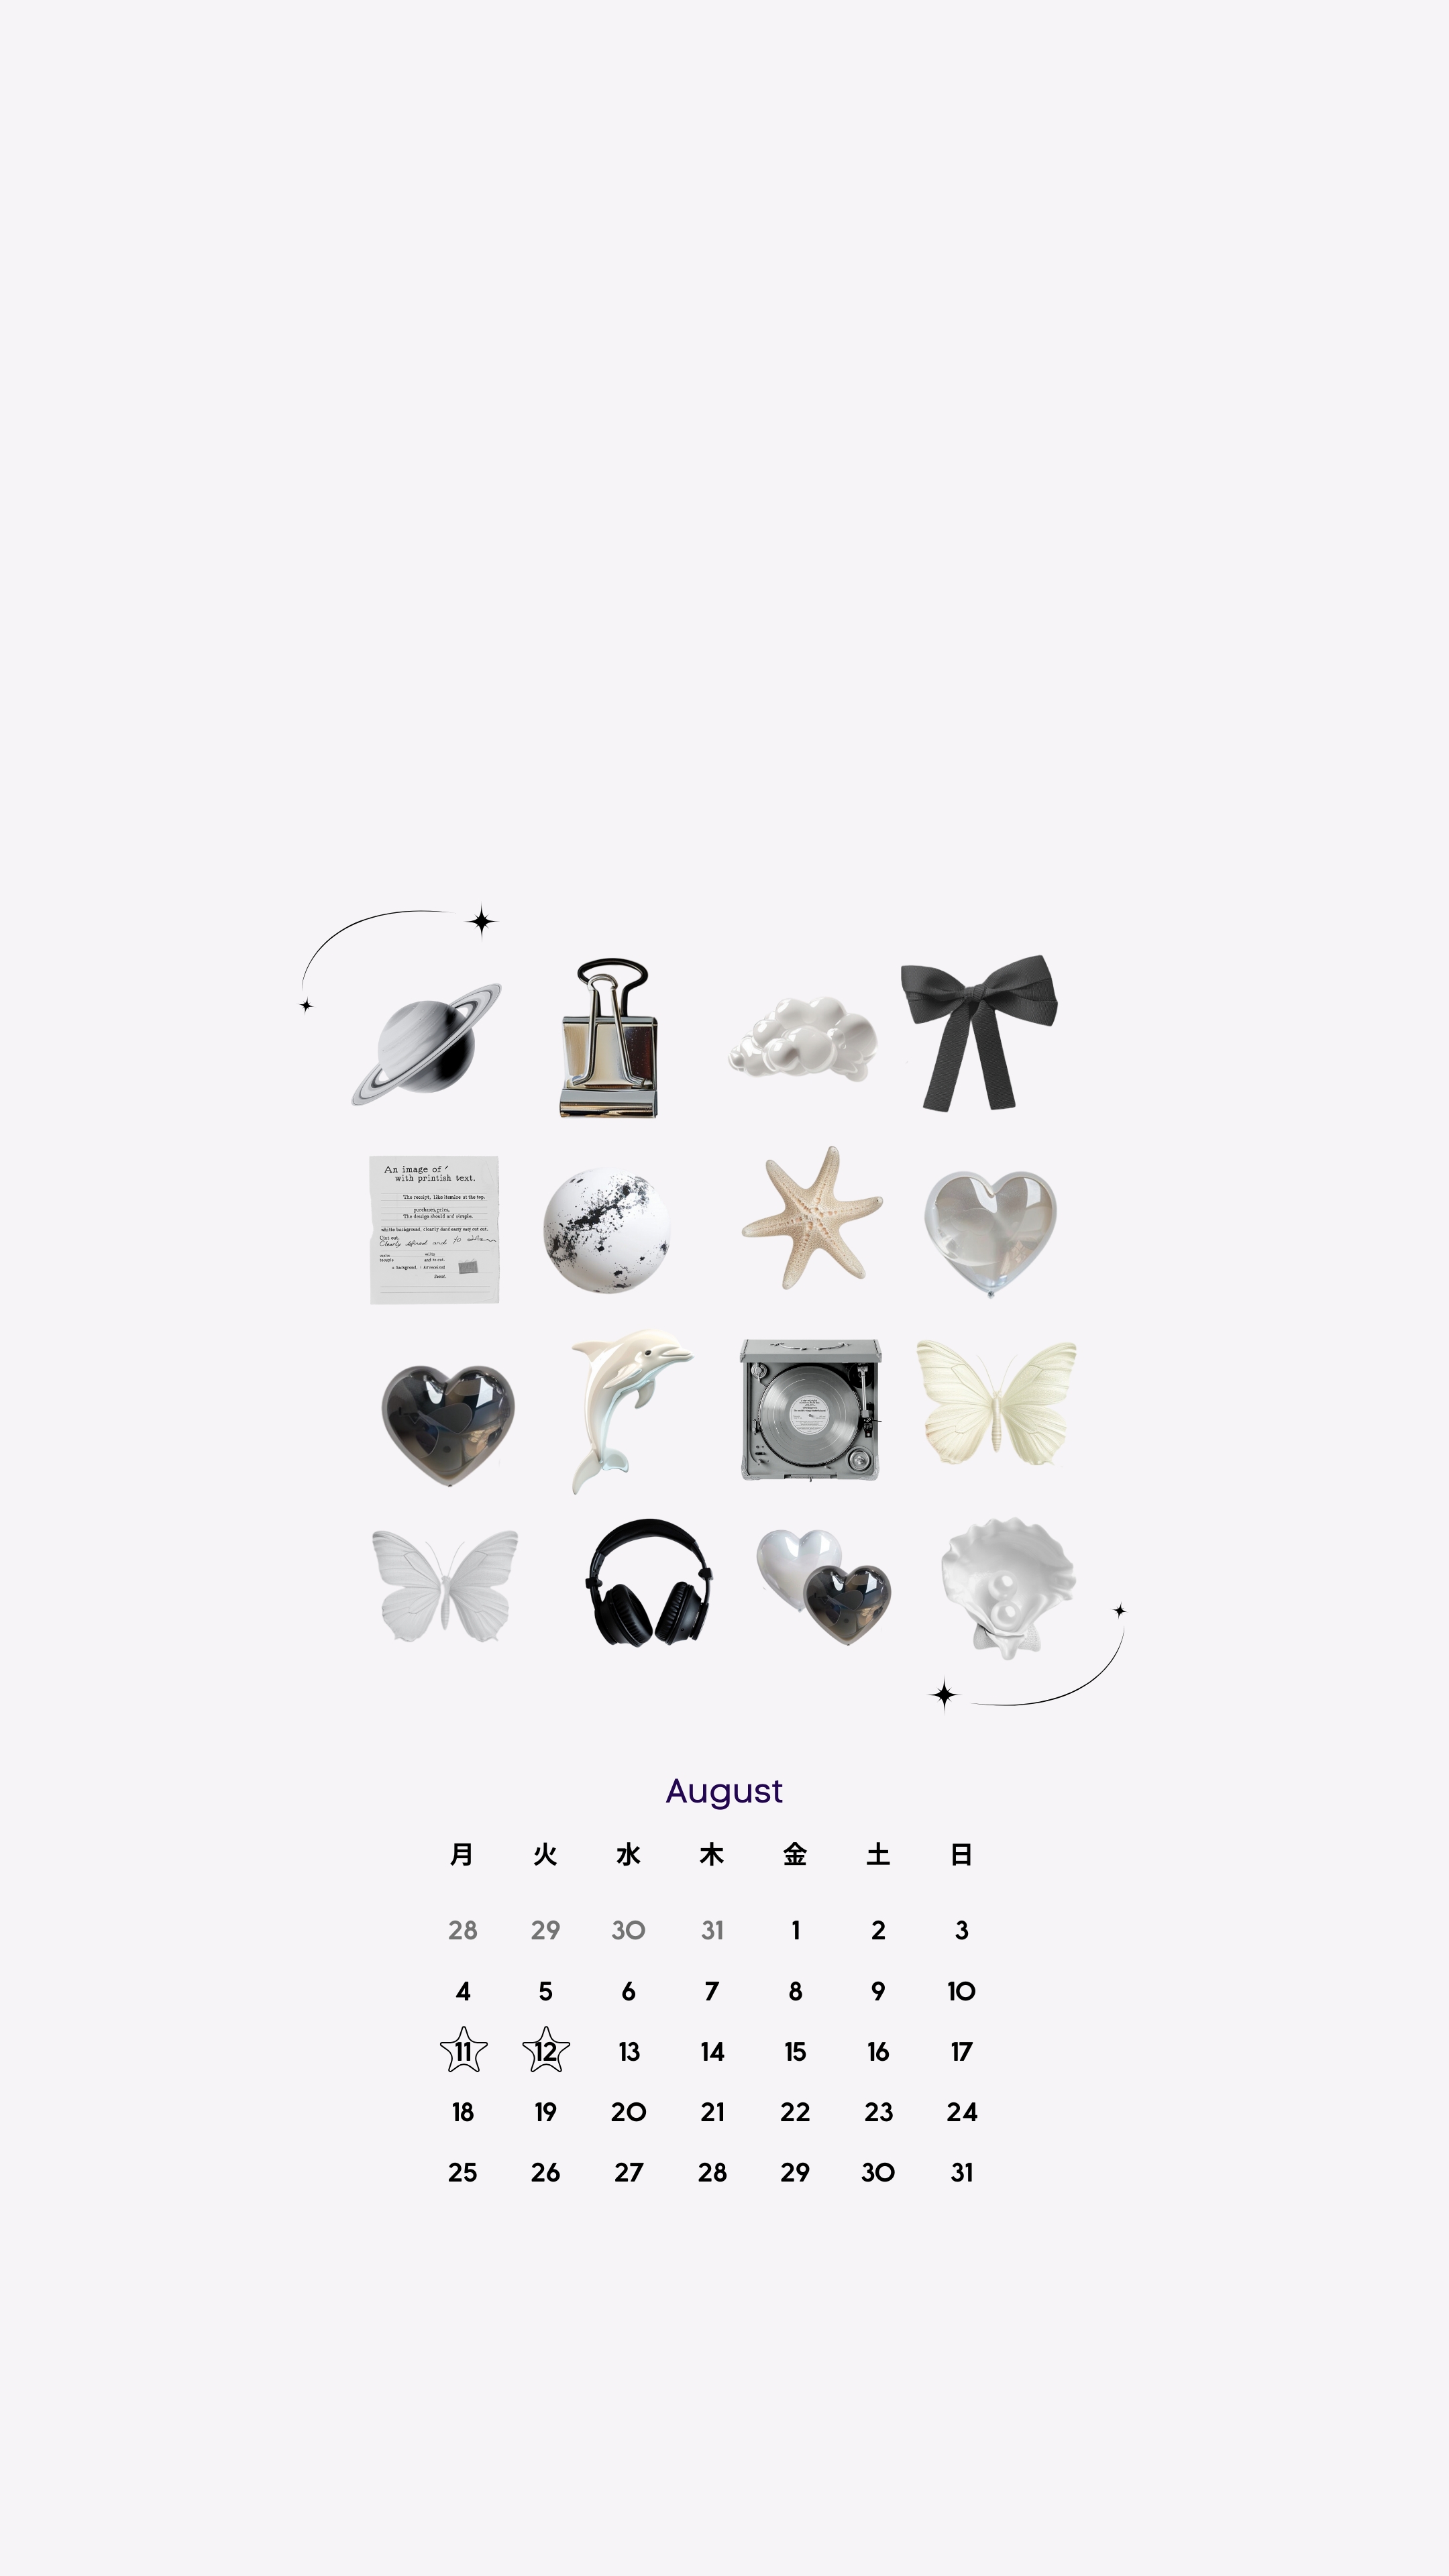 Simple and Elegant August Icons Design Ταπετσαρία[8a6faff9cb2649288108]